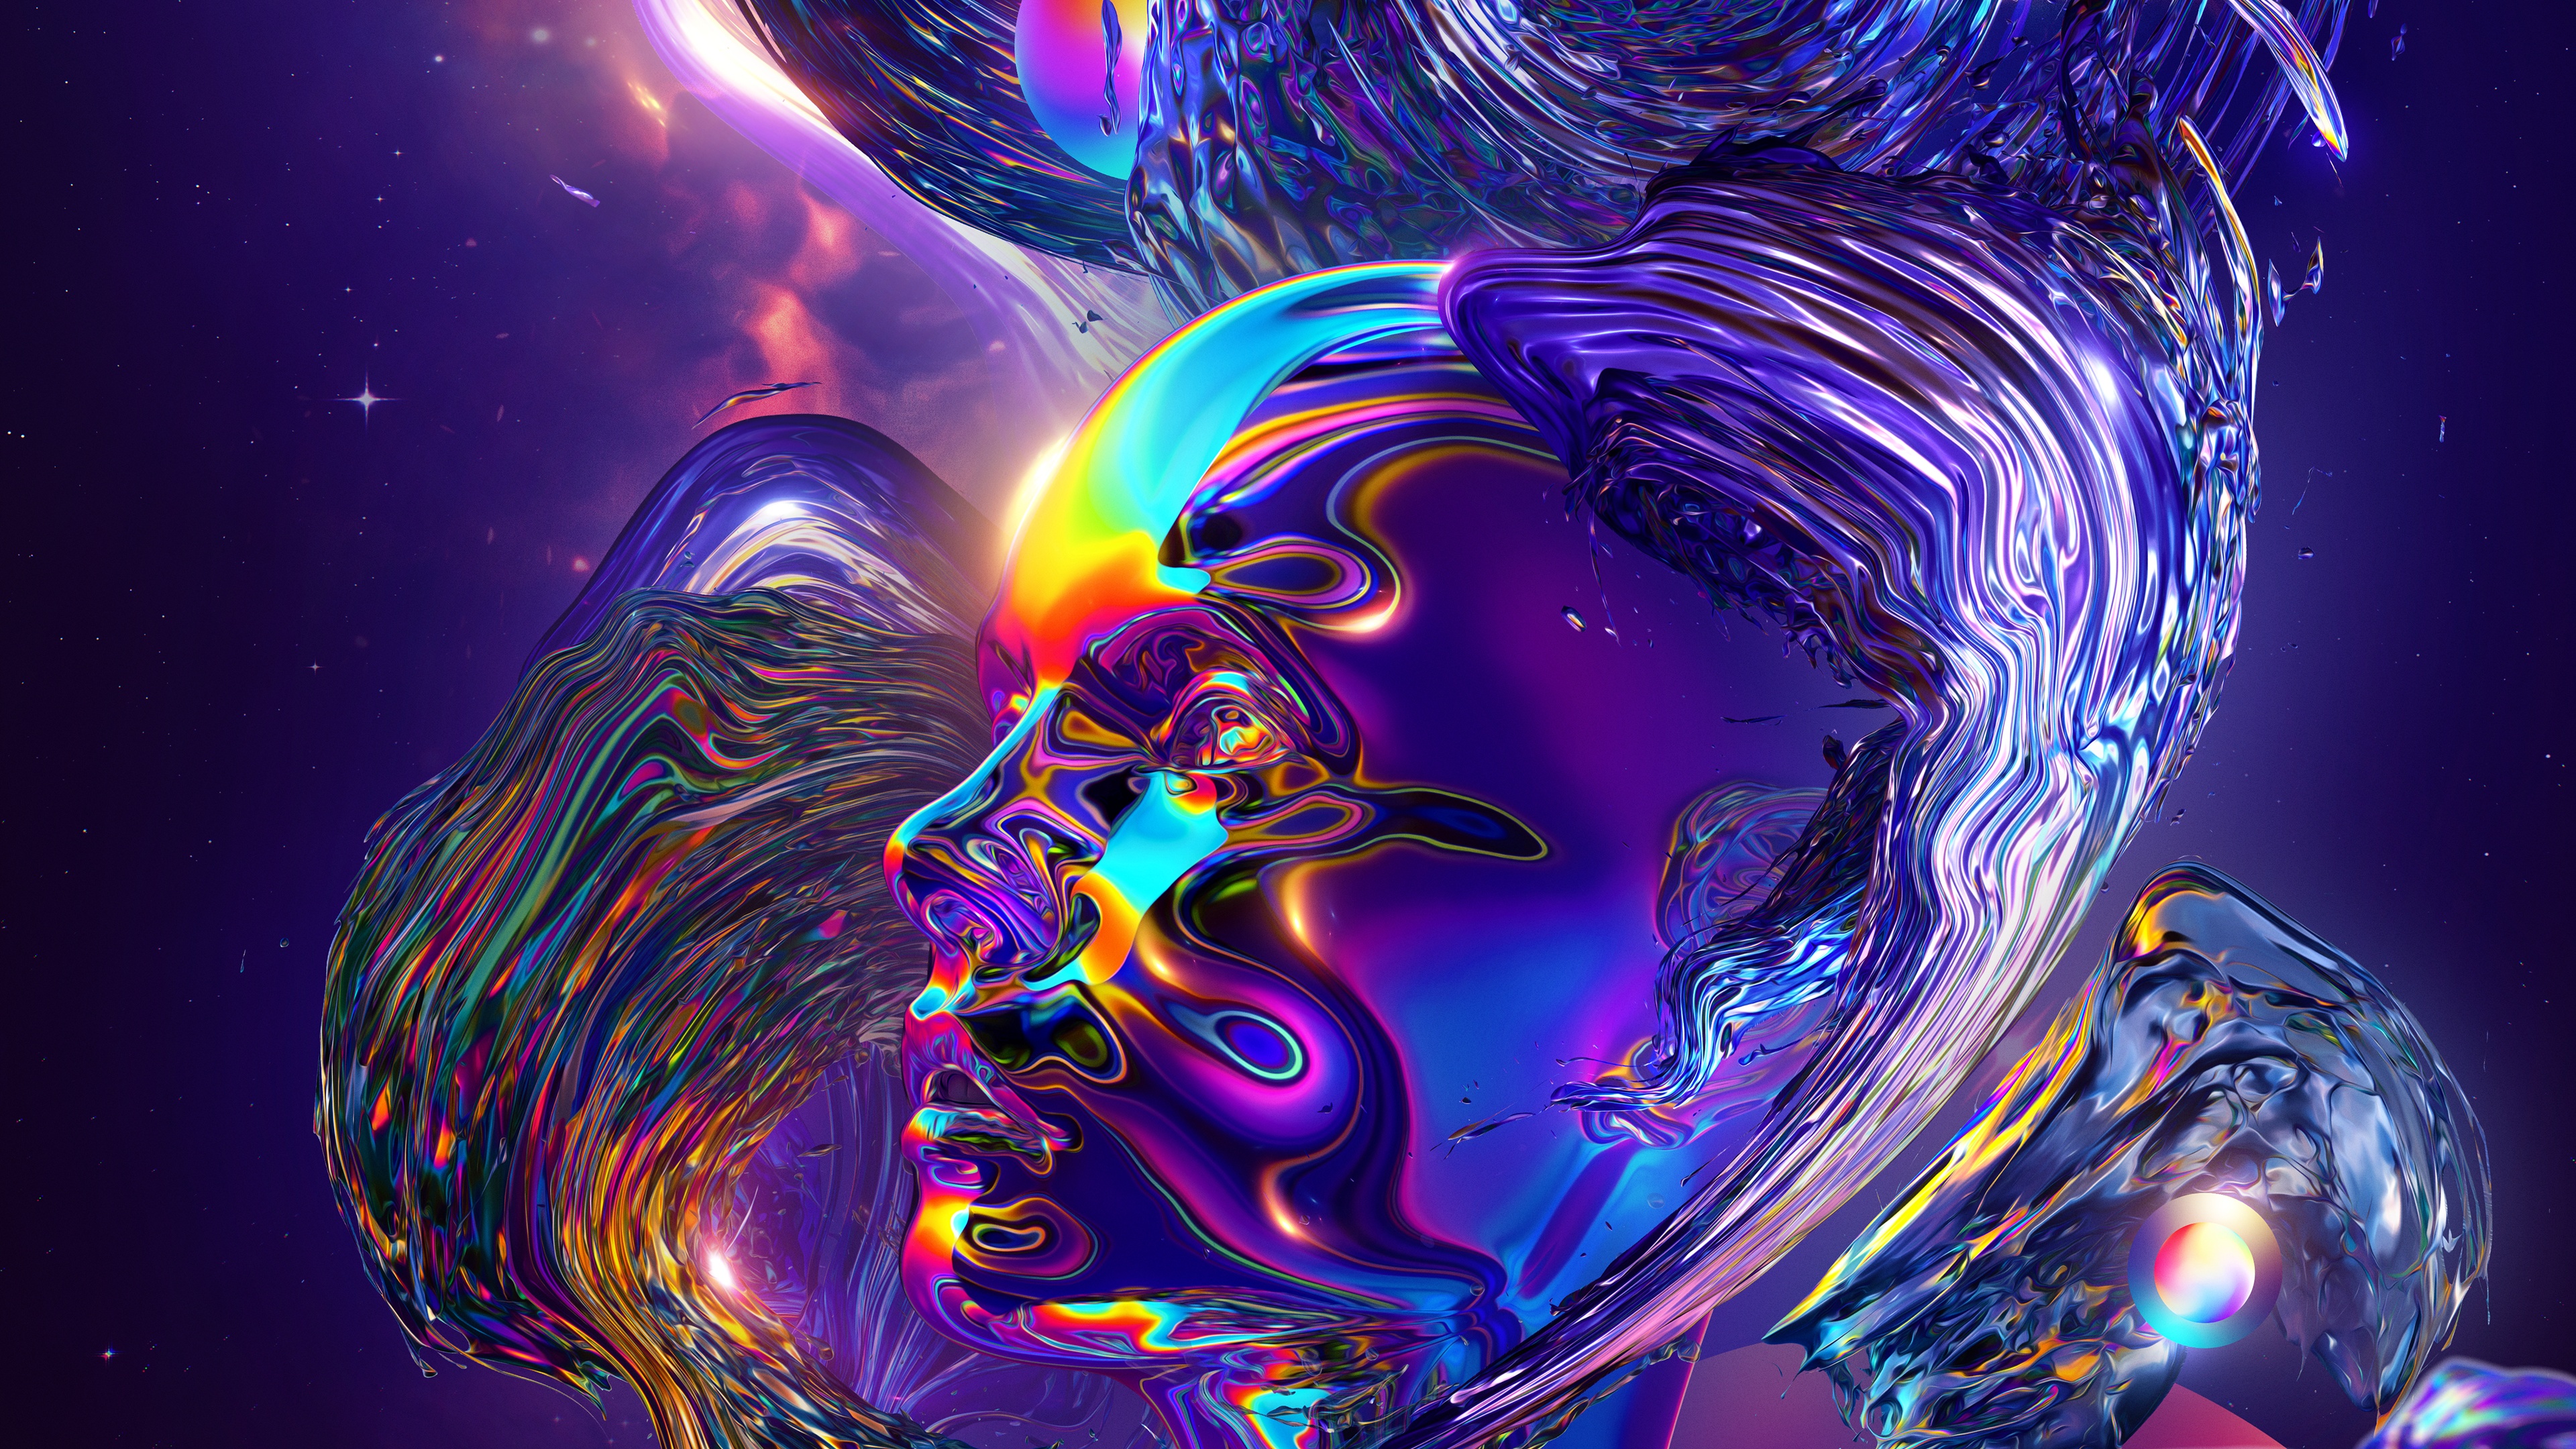 Download wallpaper 3840x2160 illusion psychedelic colorful art 4k uhd  169 hd background